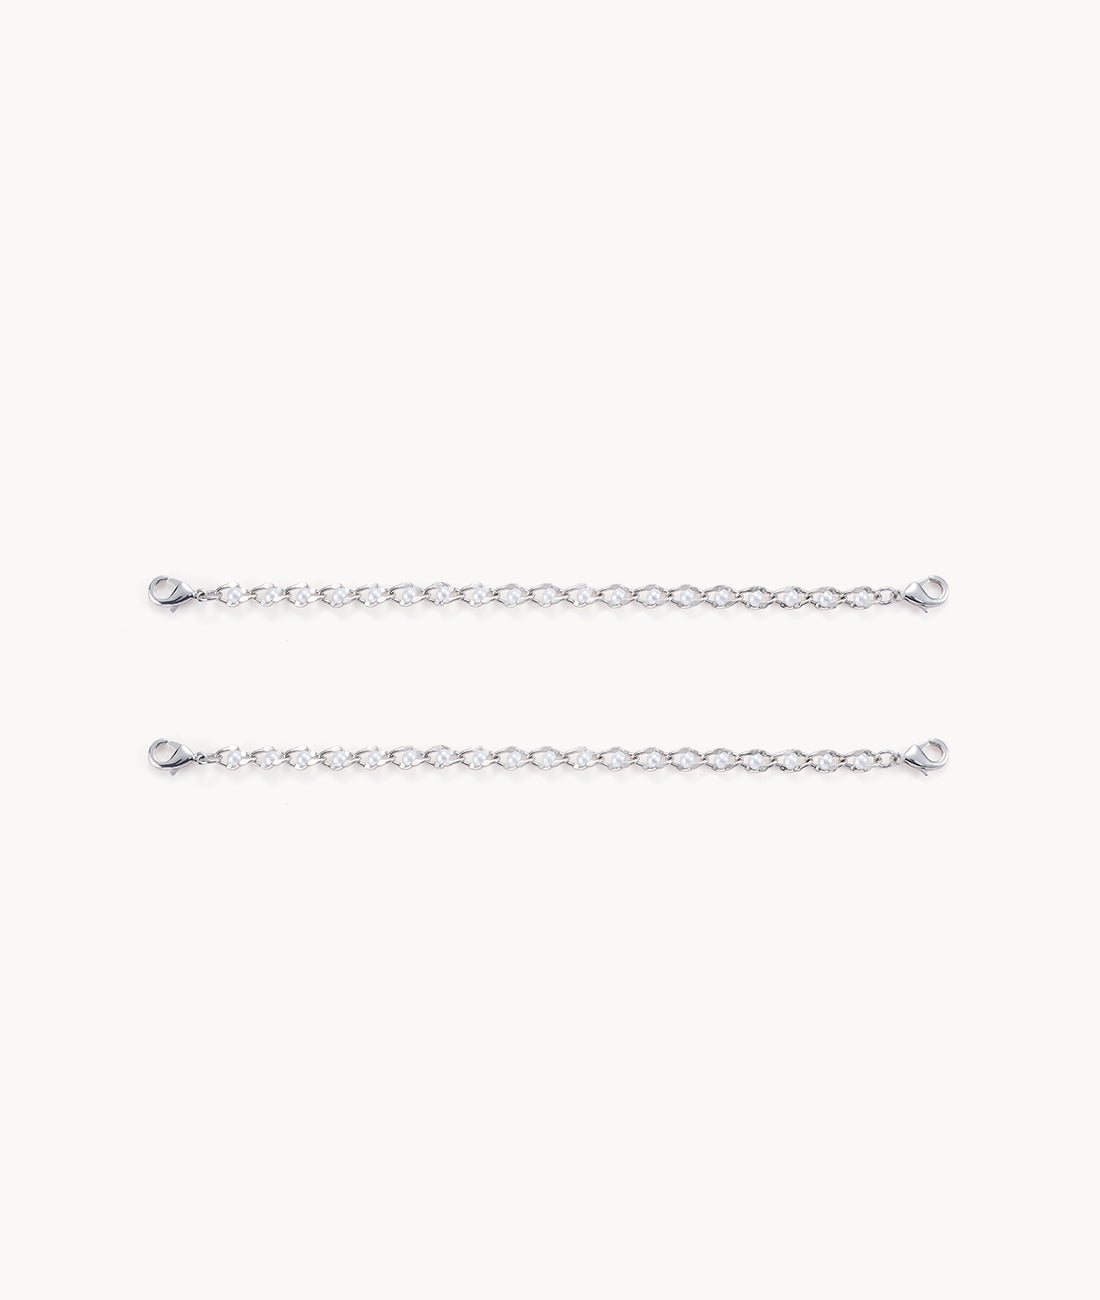 Silver Beaded Swing Chain 7or9